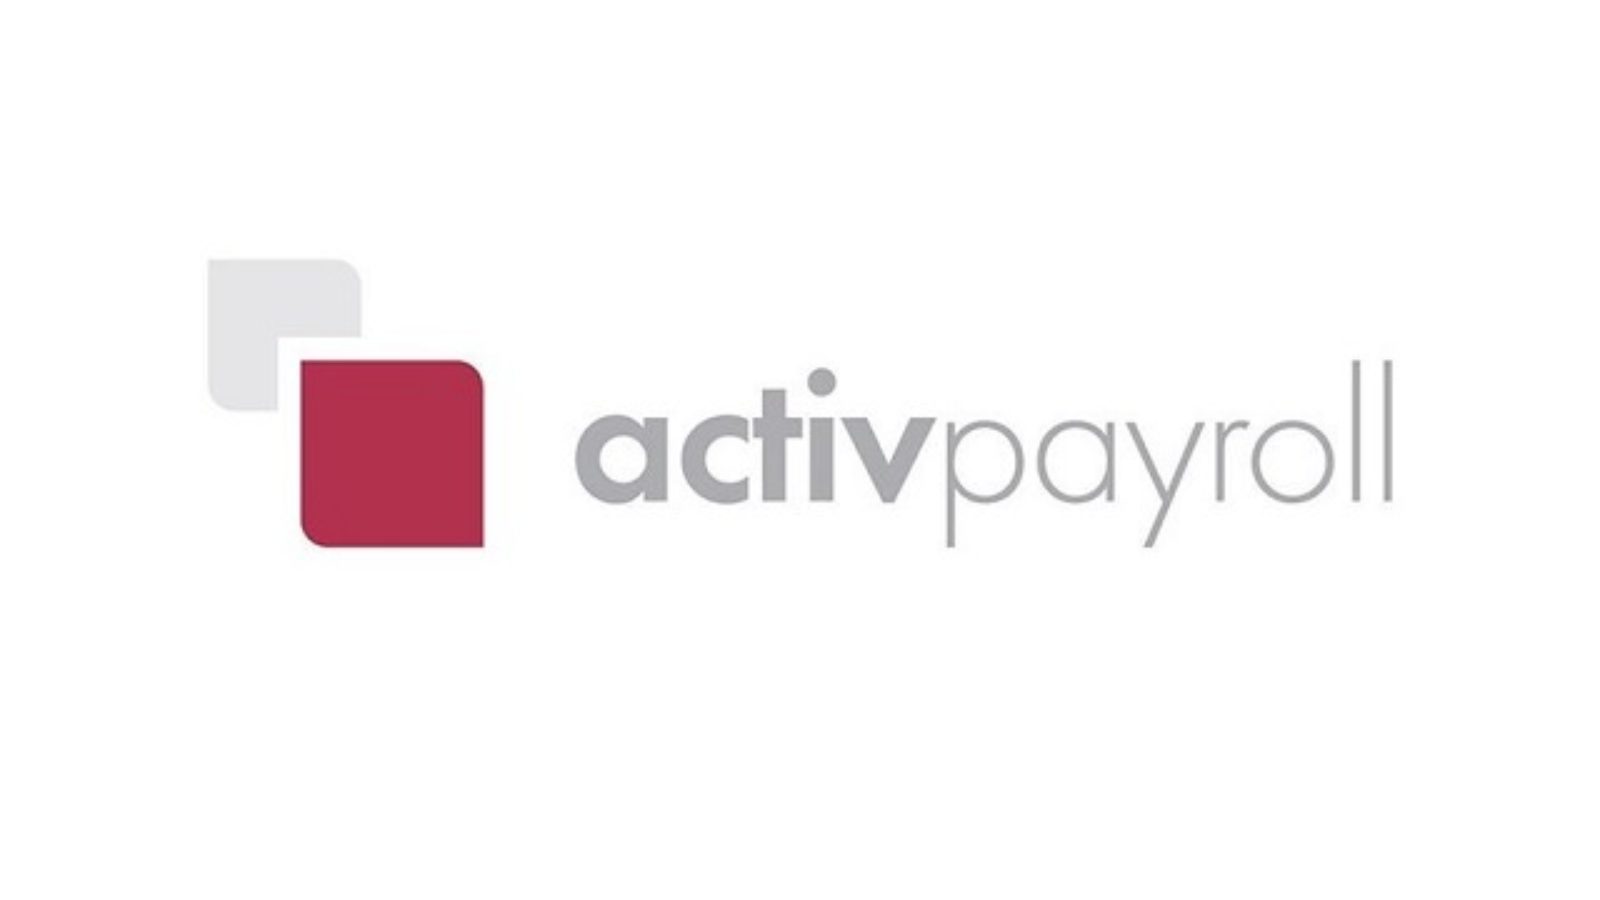 Global payroll services firm activpayroll announces double digit revenue growth and continues international expansion